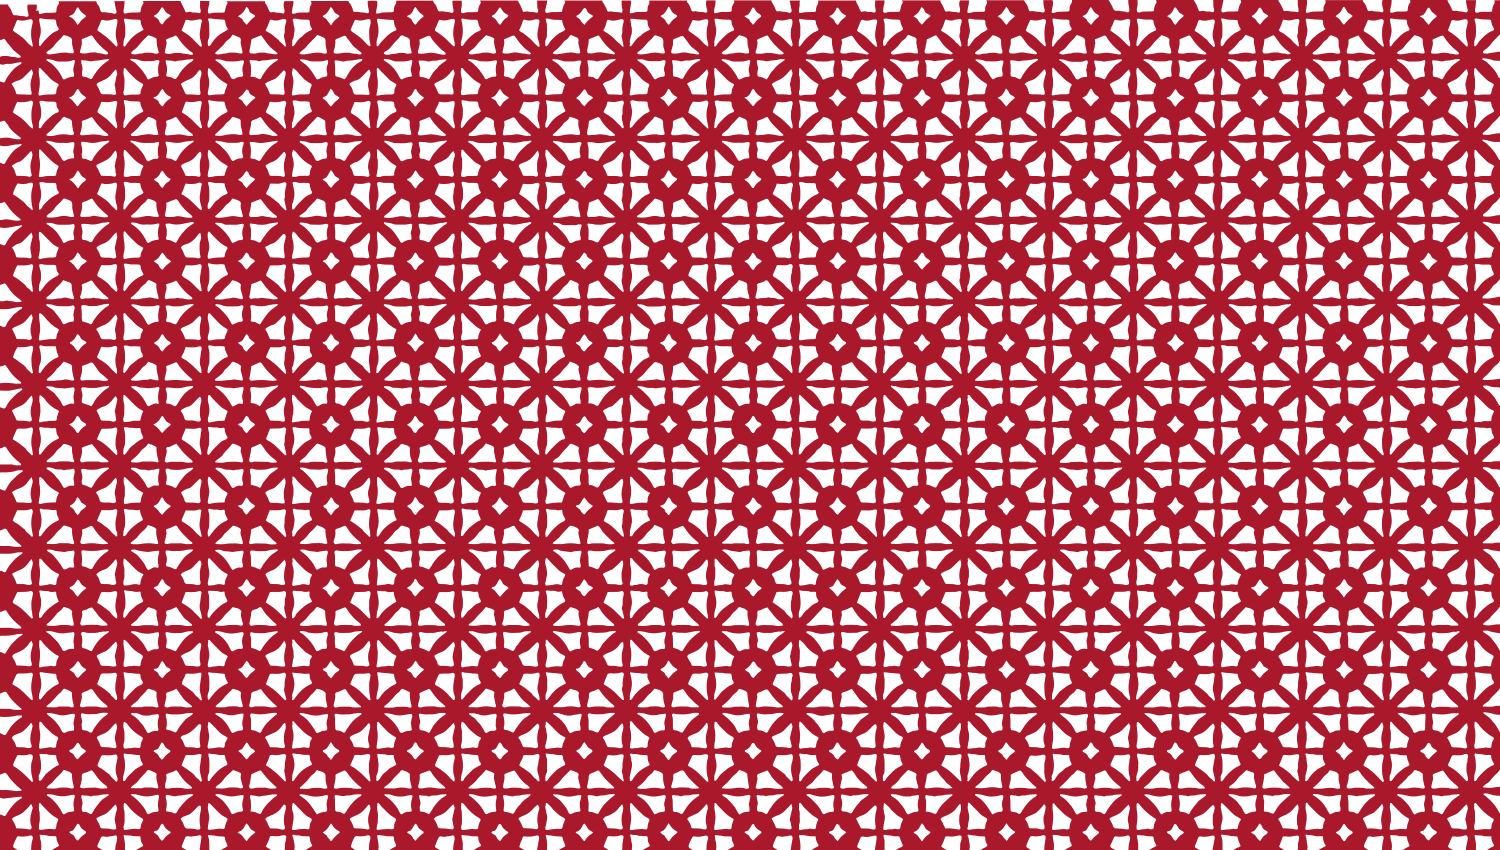 Parasoleil™ Sampoerna© pattern displayed with a standard color overlay